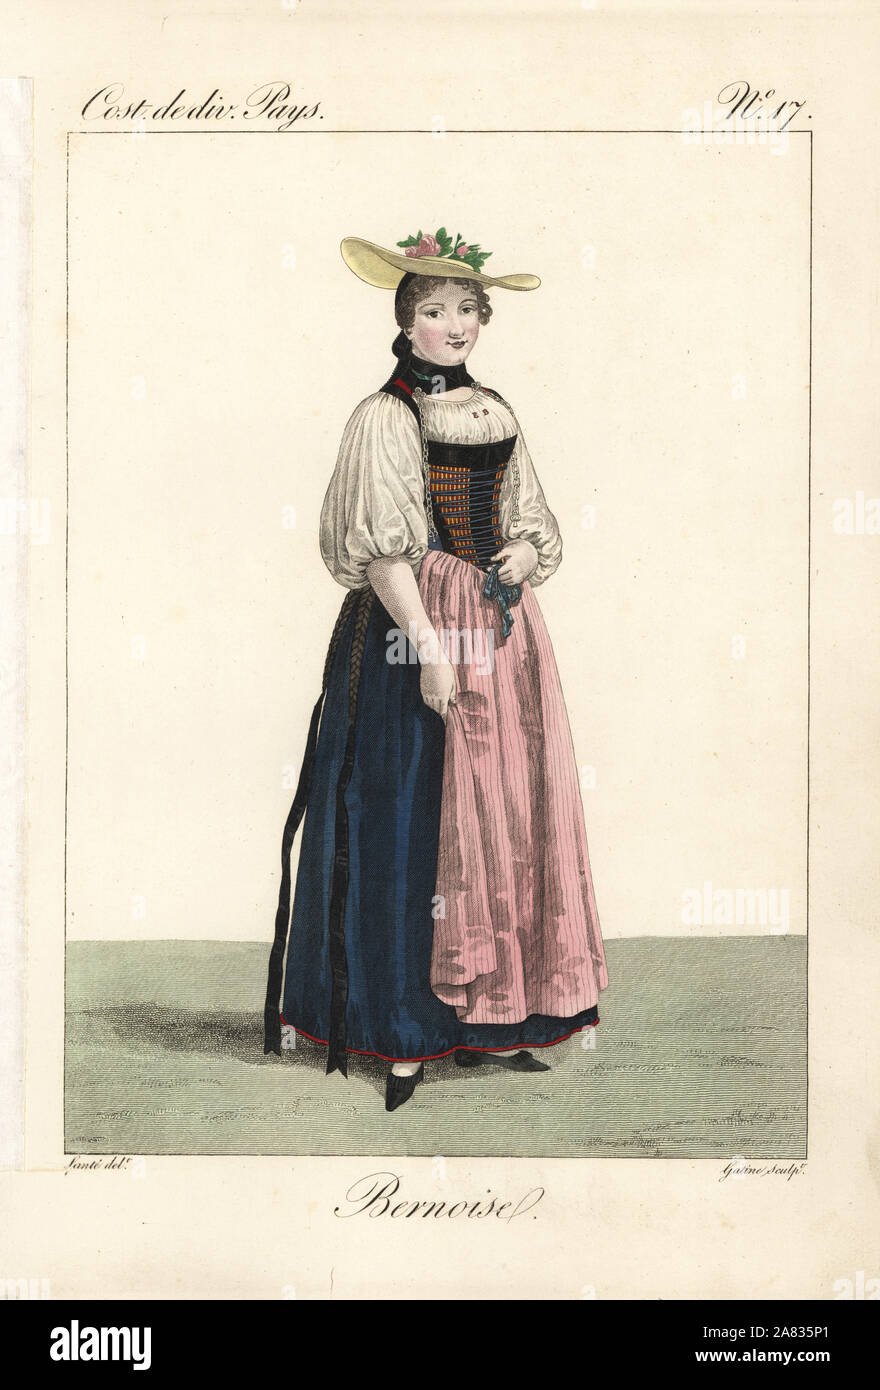 Single woman of Bern in distinctive straw hat decorated with flowers, Switzerland, 19th century. Her chemise is embroidered with her initials, E.B. Her long pigtails are dressed with ribbons that reach her feet. Handcoloured copperplate engraving by Georges Jacques Gatine after an illustration by Louis Marie Lante from Costumes of Various Countries, Costumes de Divers Pays, Paris, 1827. Stock Photo